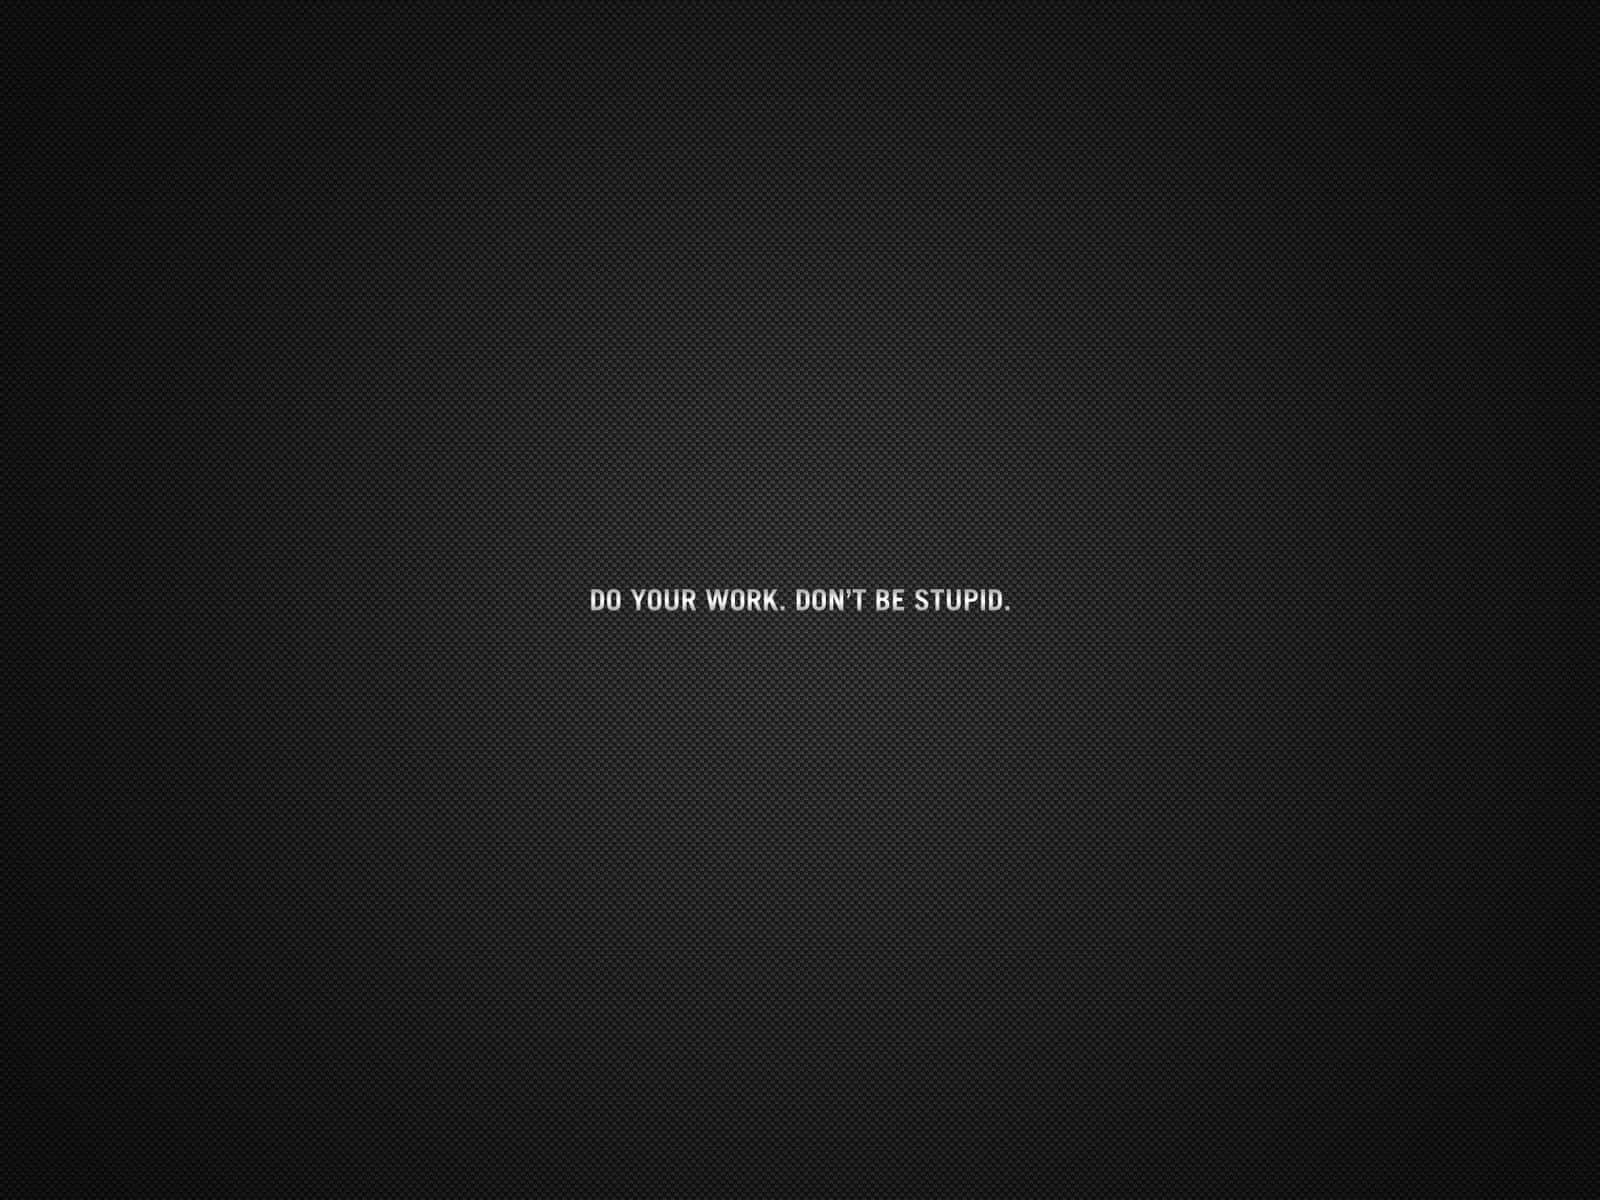 [100+] Motivational Quotes Black Backgrounds | Wallpapers.com